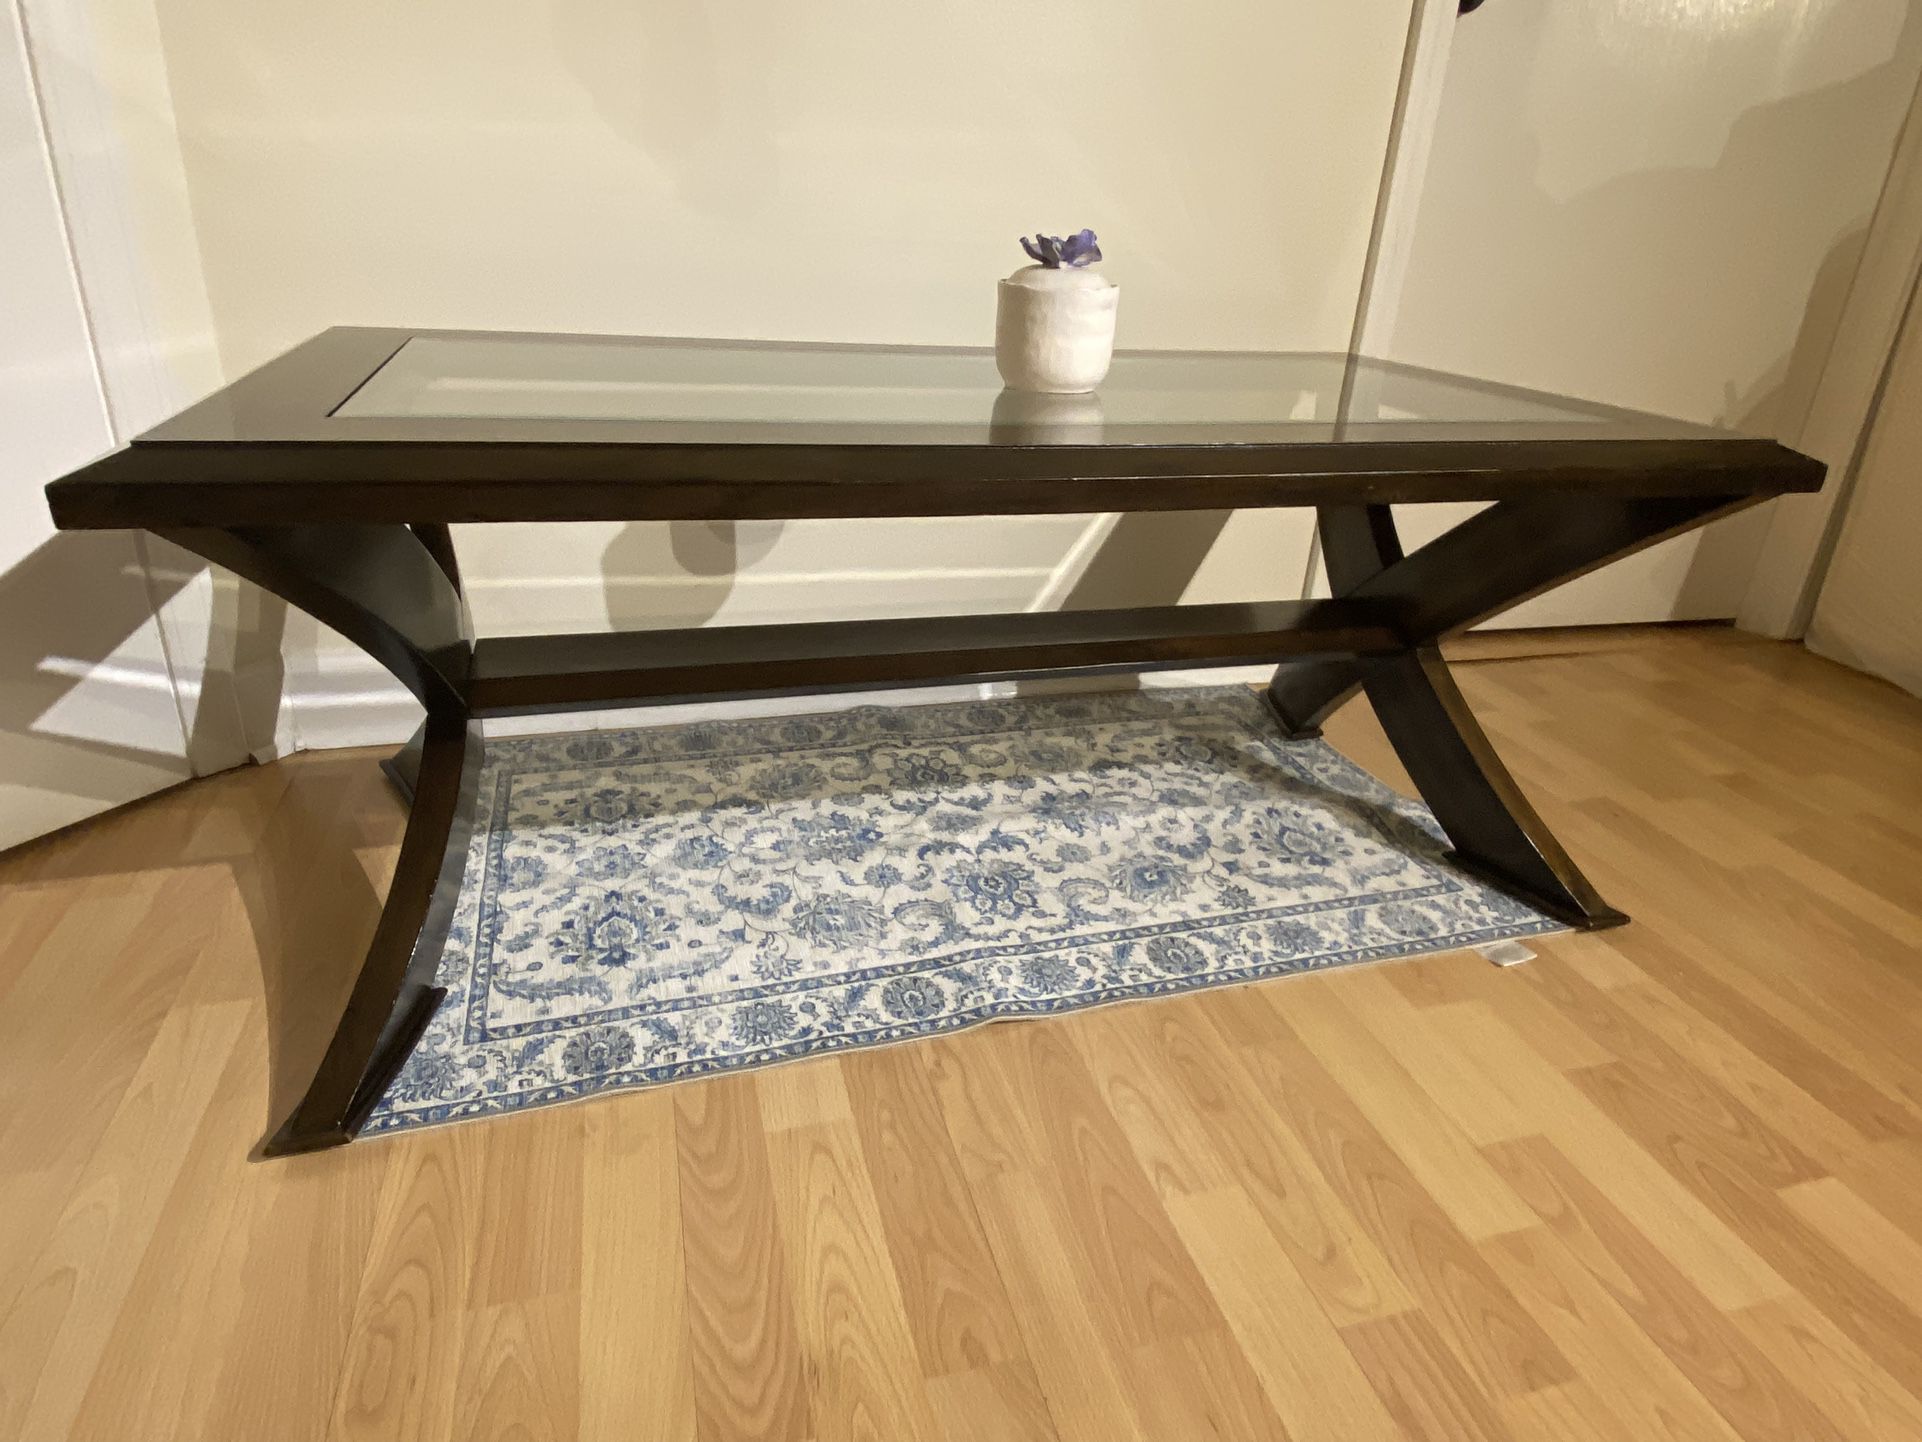 Solid Wood, Glass Topped Coffee Table With Storage Shelf Underneath